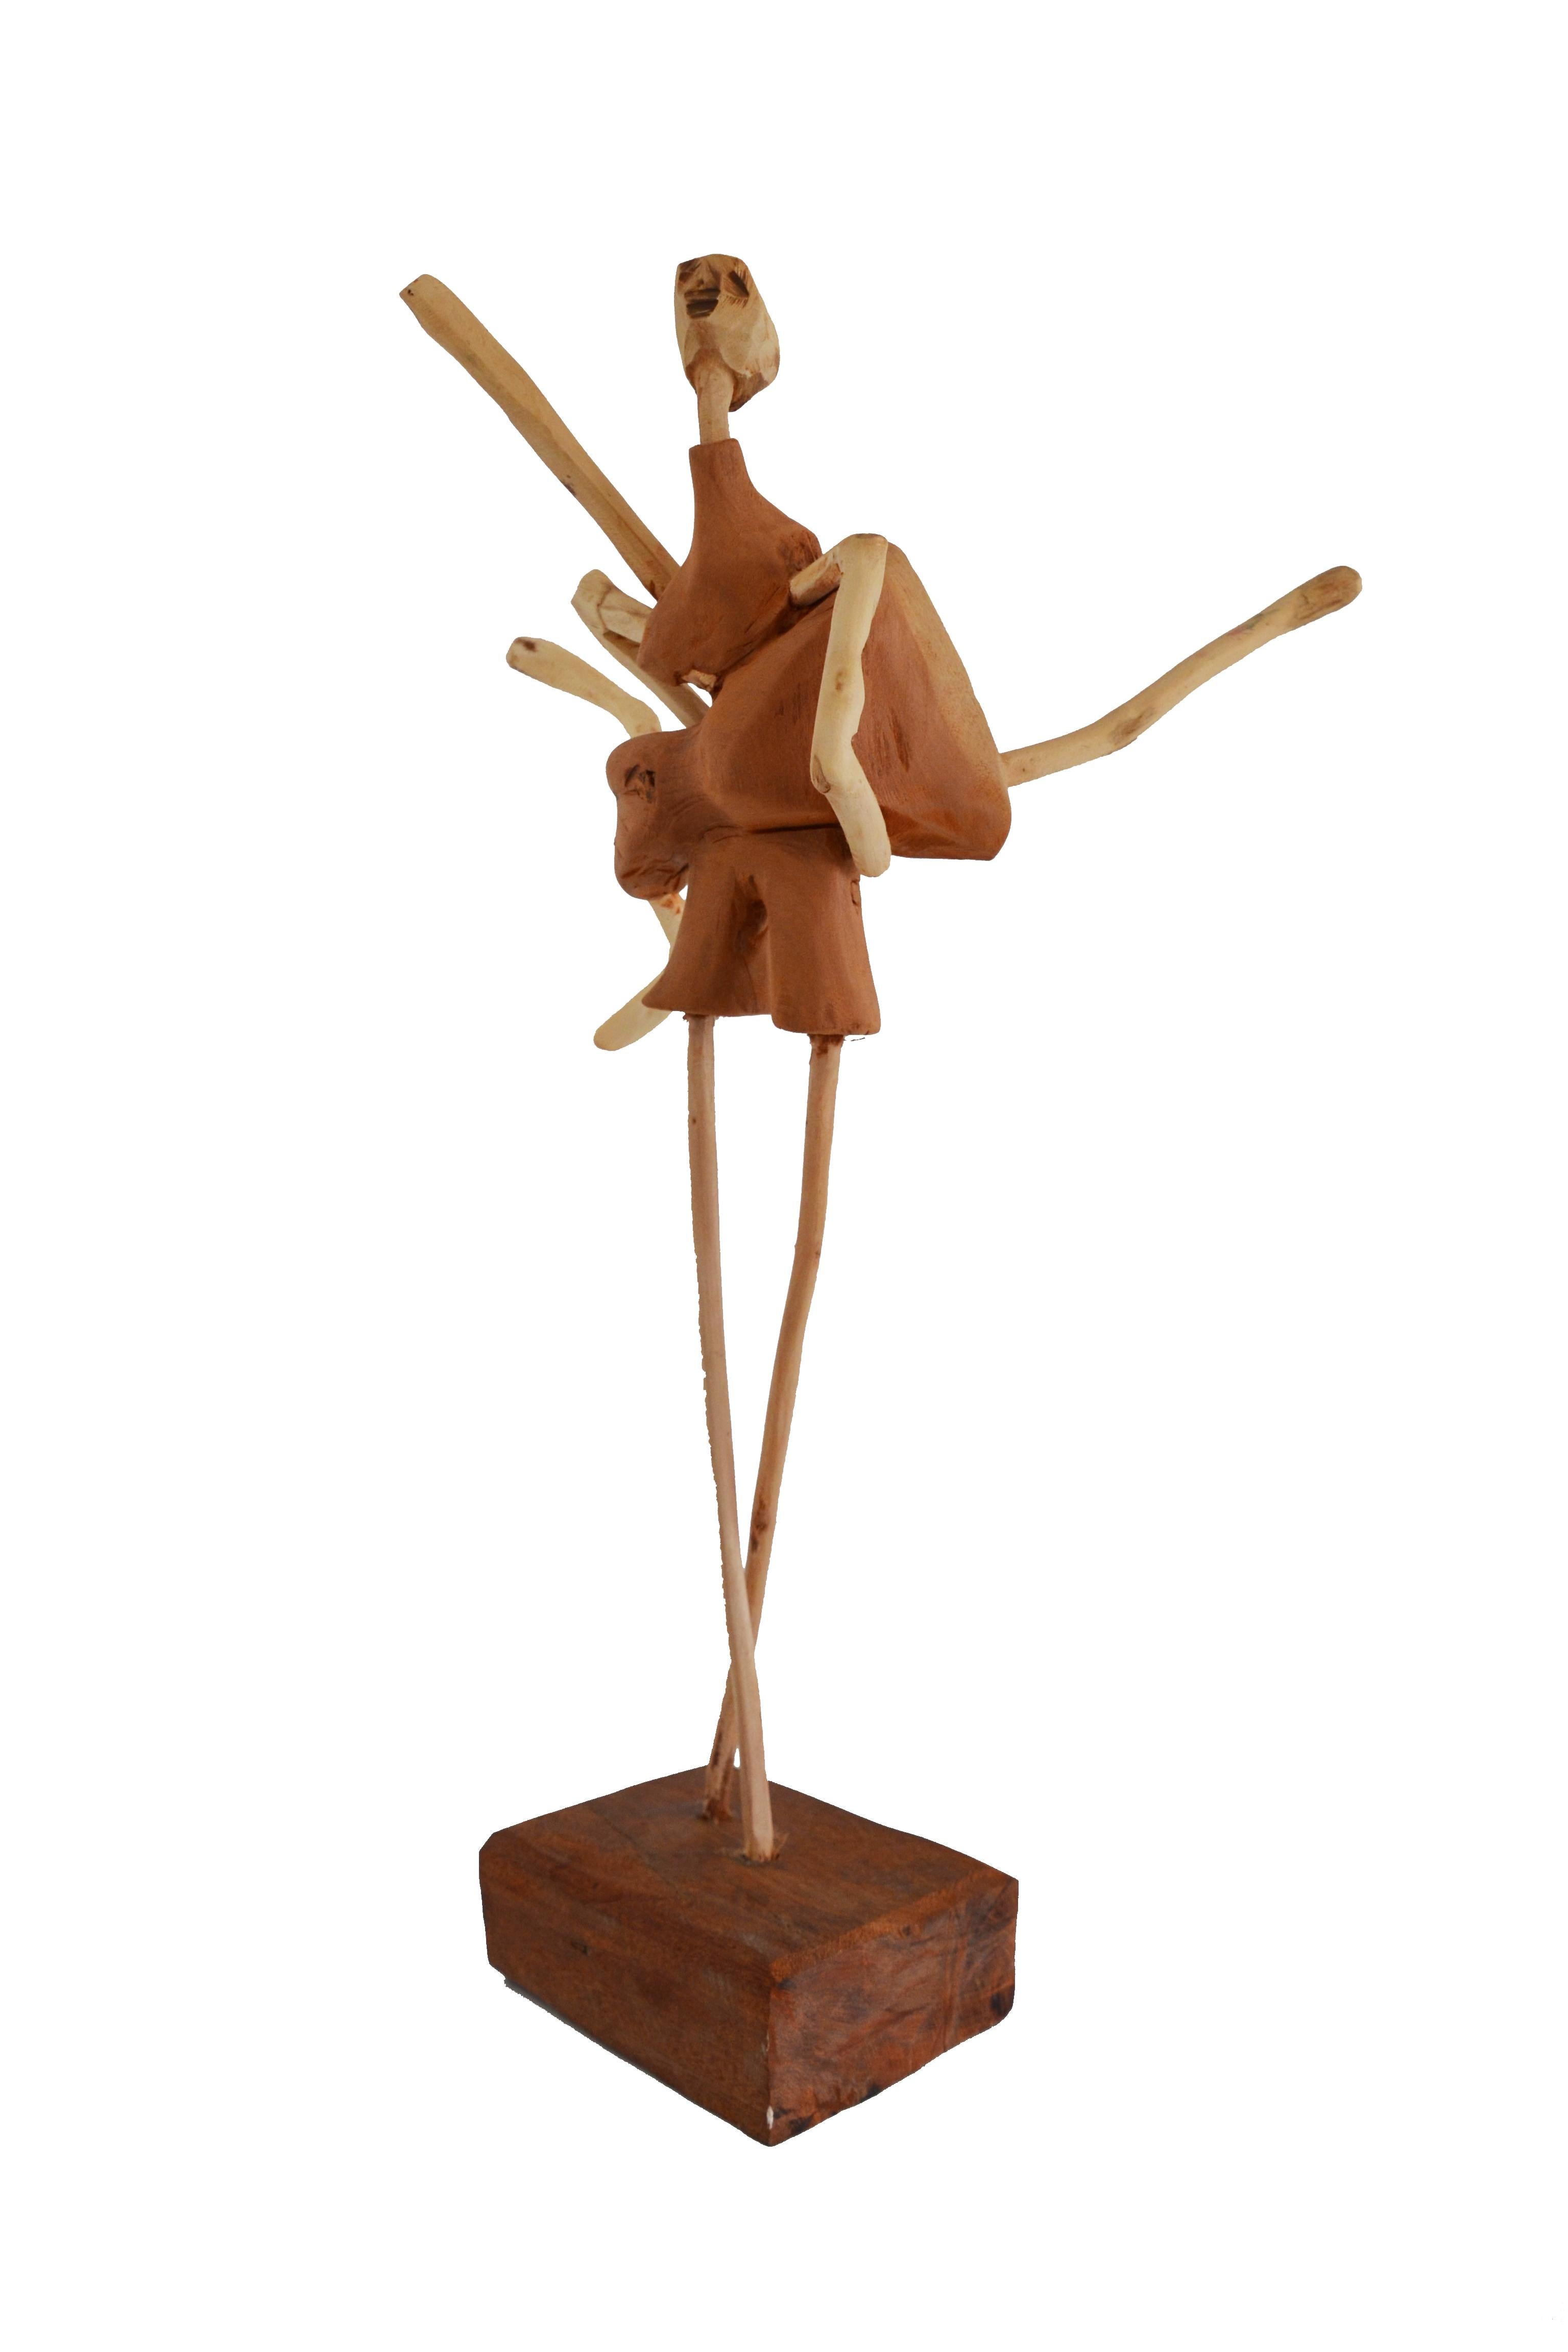 Brazilian Hand-Carved Wood Sculpture Ballerina In Excellent Condition For Sale In Rio de Janeiro, RJ